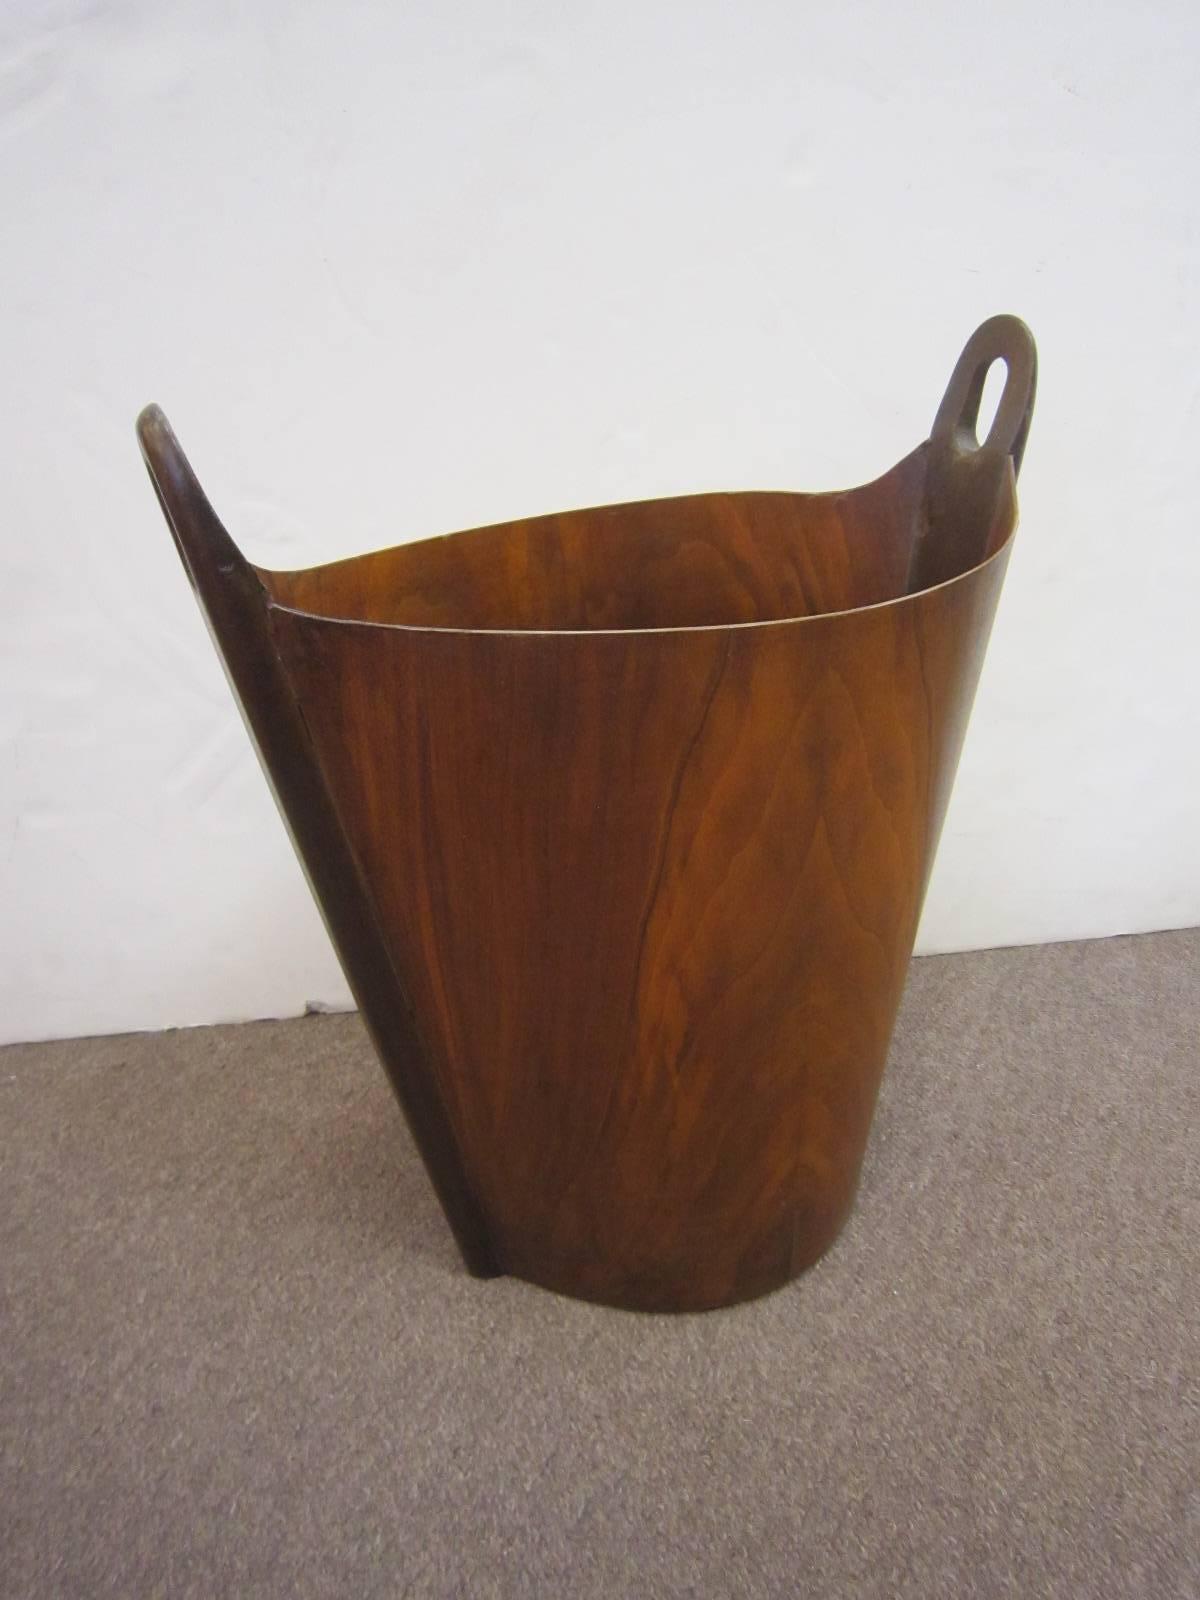 Mid-Century Modern Danish, beautifully grained waste basket /trash receptacle with sculptural handles extending the full length of the vessel- by Einar Barnes for P. S. Heggen
Can be used for magazines, umbrellas, as a music stand, or as a waste